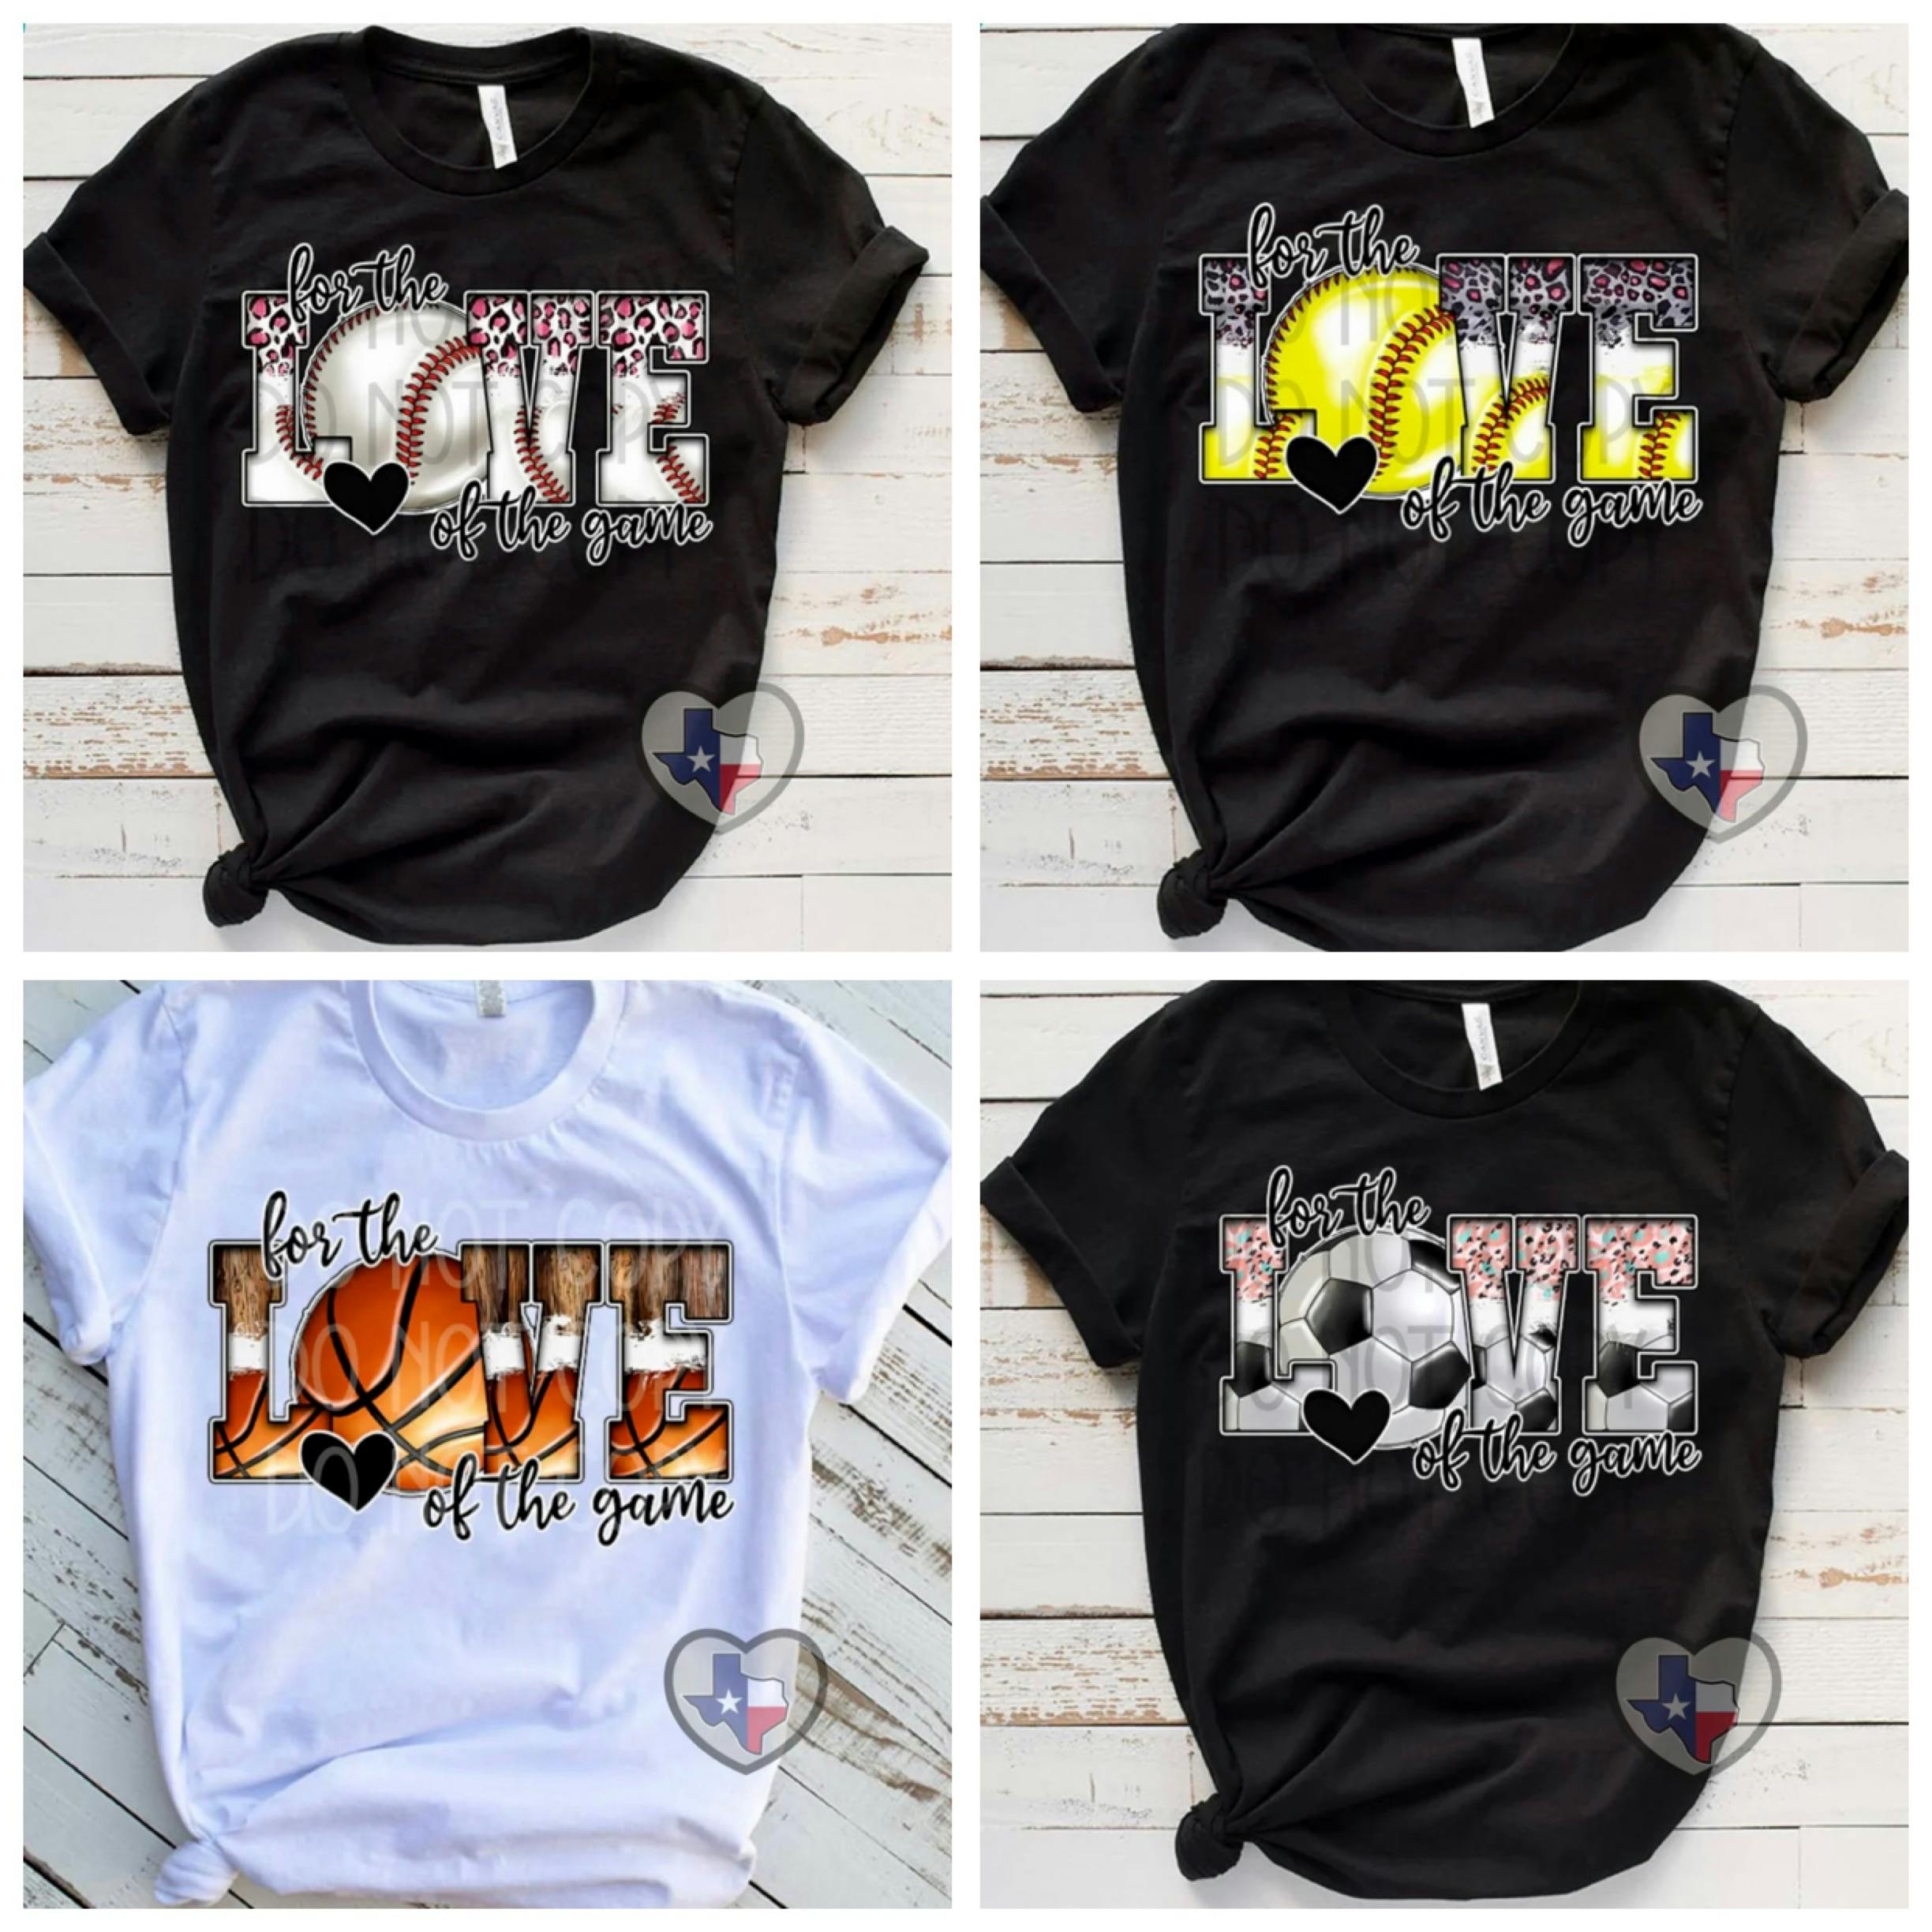 For the love of the game Tshirts 